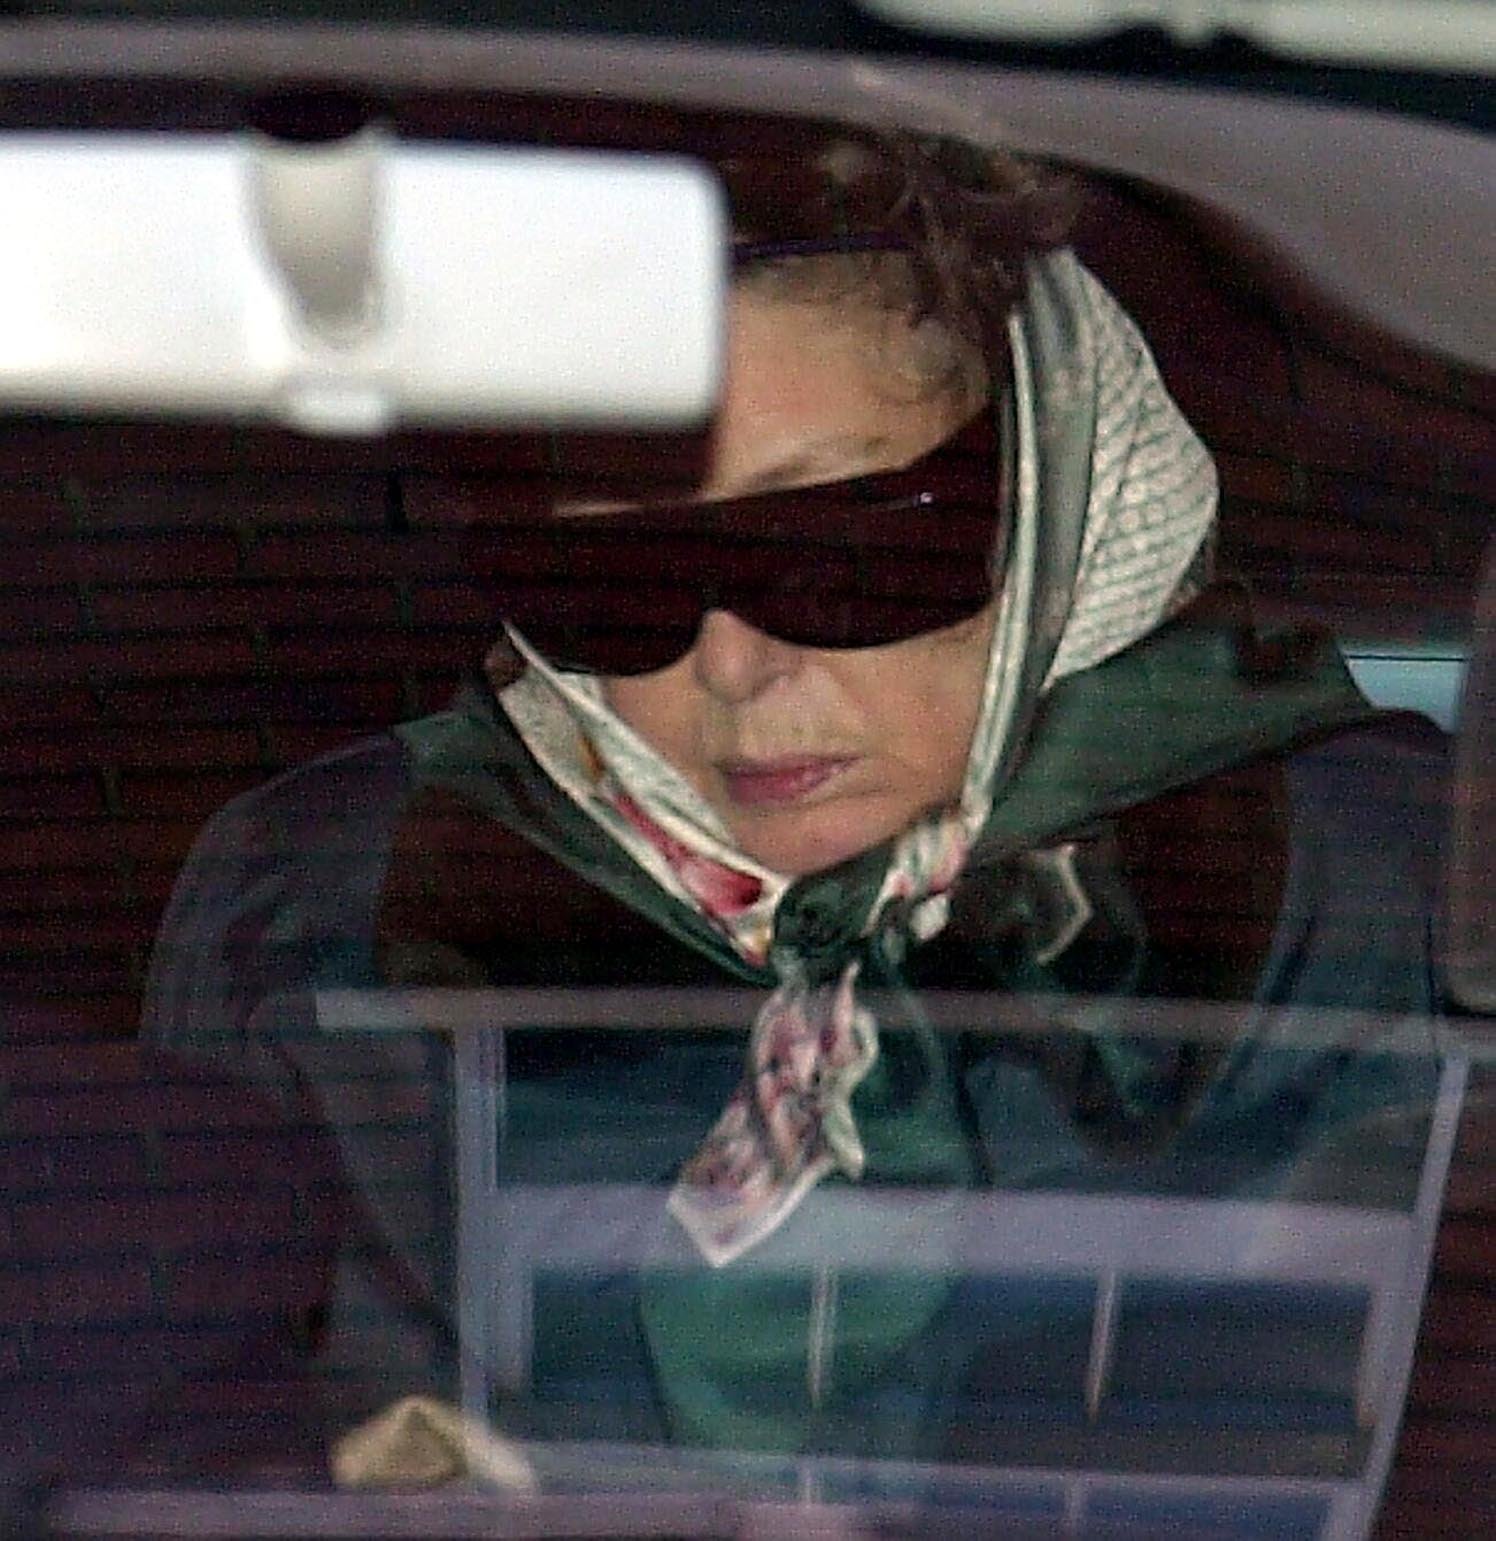 She is pictured leaving London's King Edward VII Hospital on November 1, 2001, three months before her death aged 71